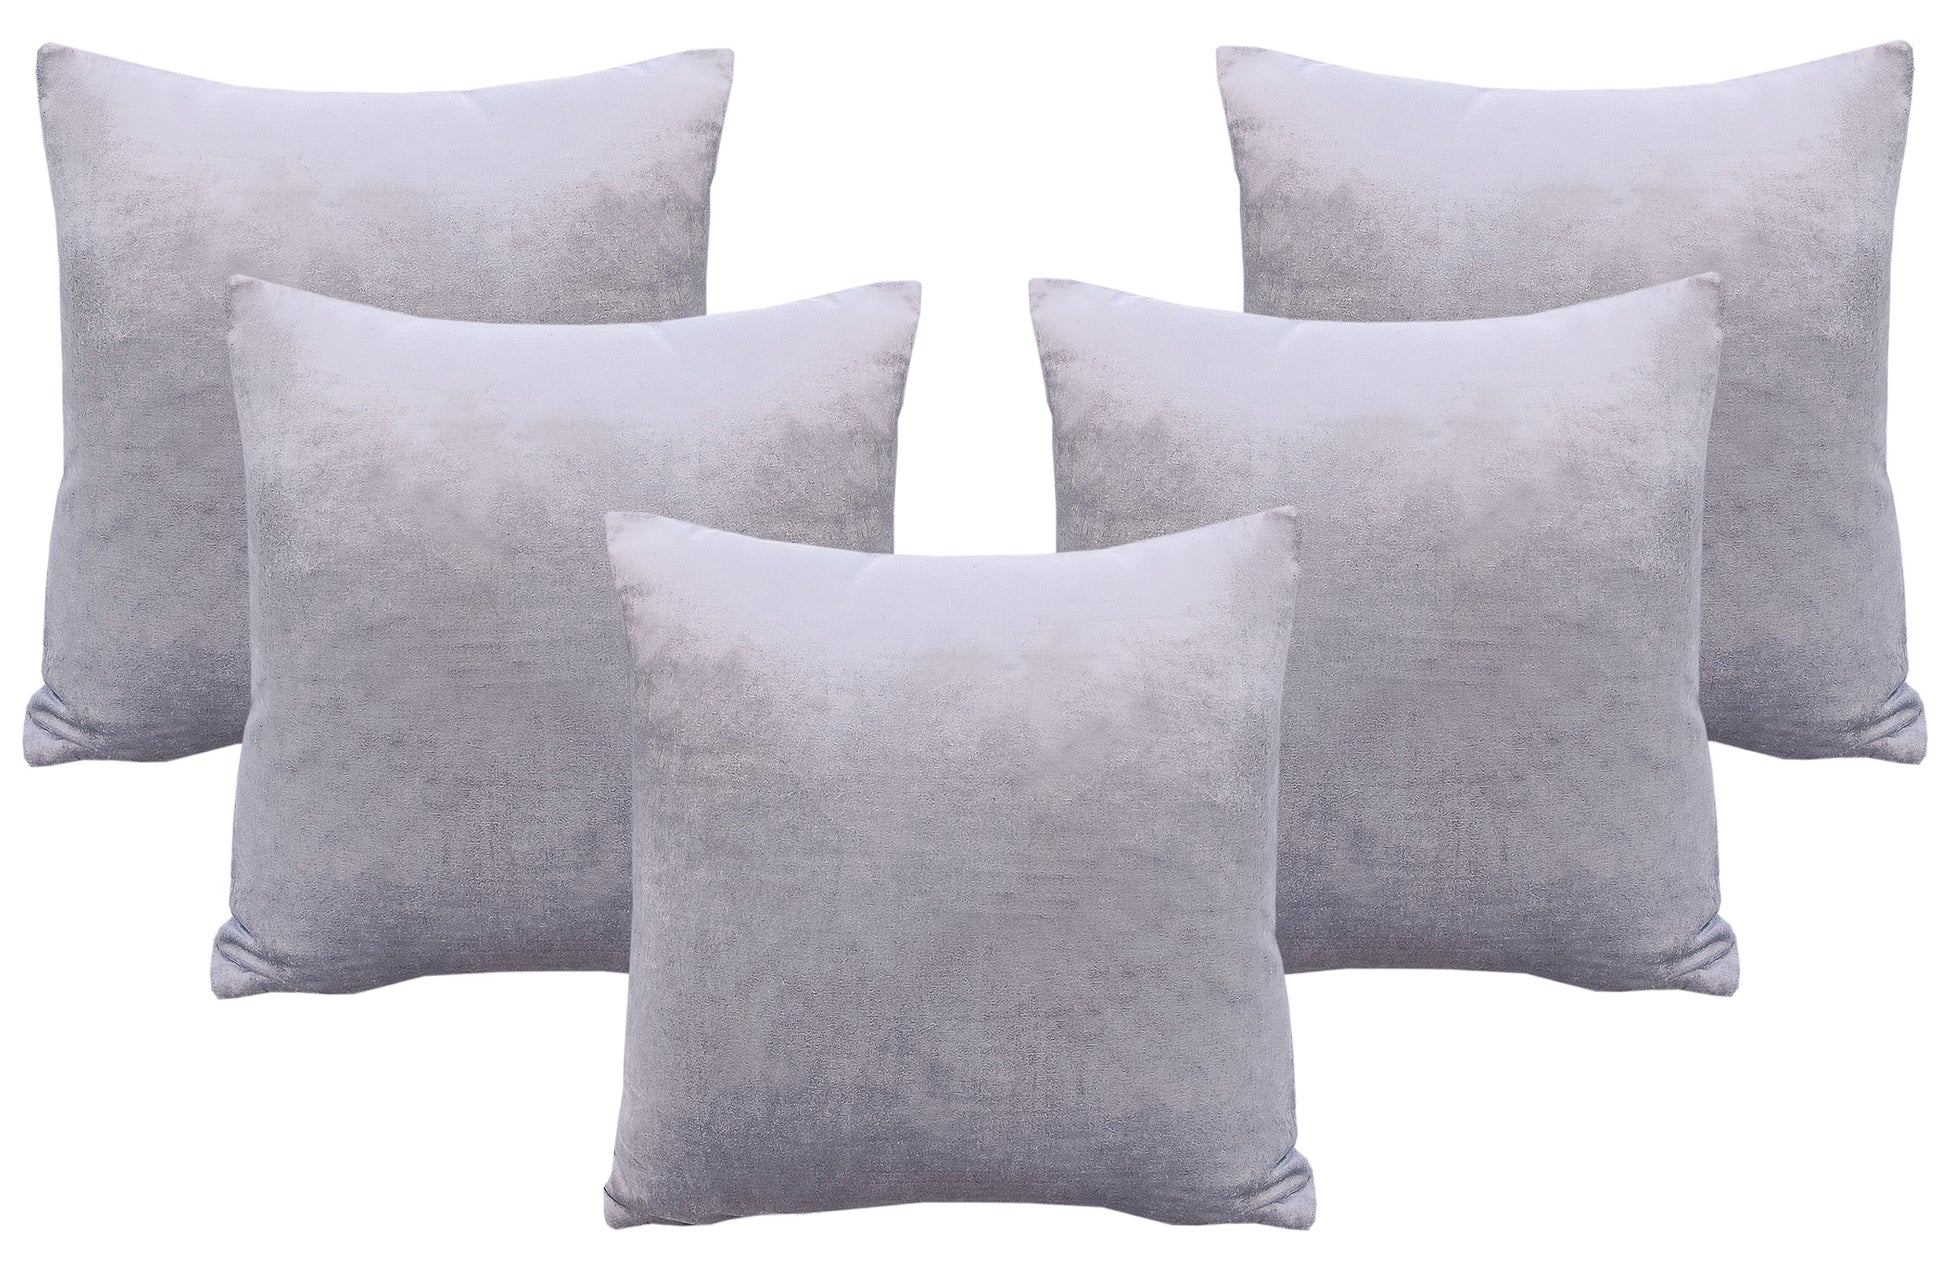 Solid Silver Velvet Cushion Cover - The Teal Thread